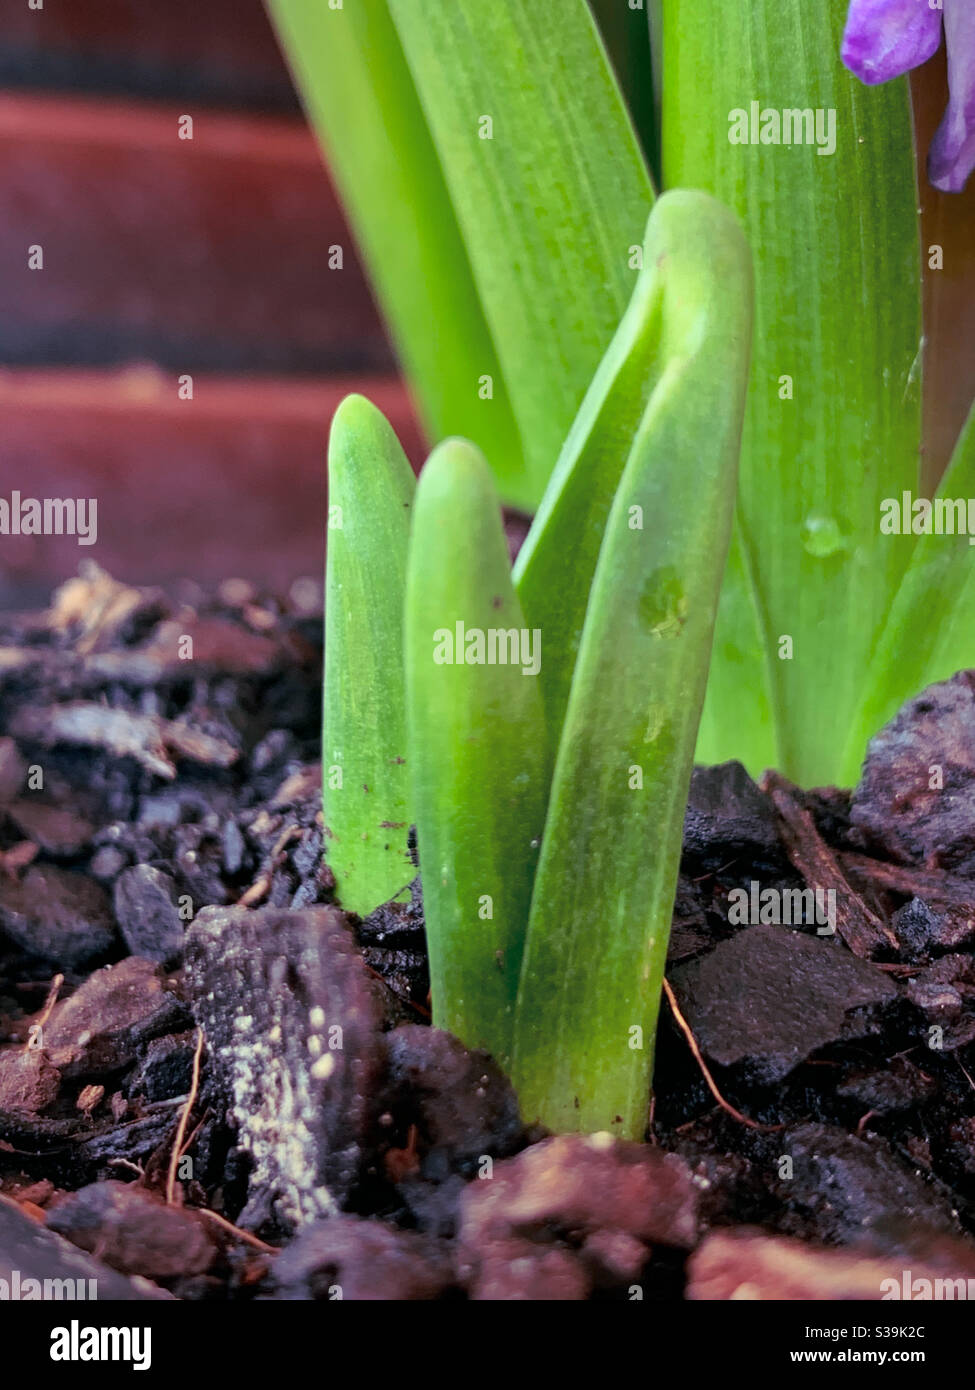 New growth, Hyacinth leaves shooting upfront the bulbs under the soil, plants Stock Photo